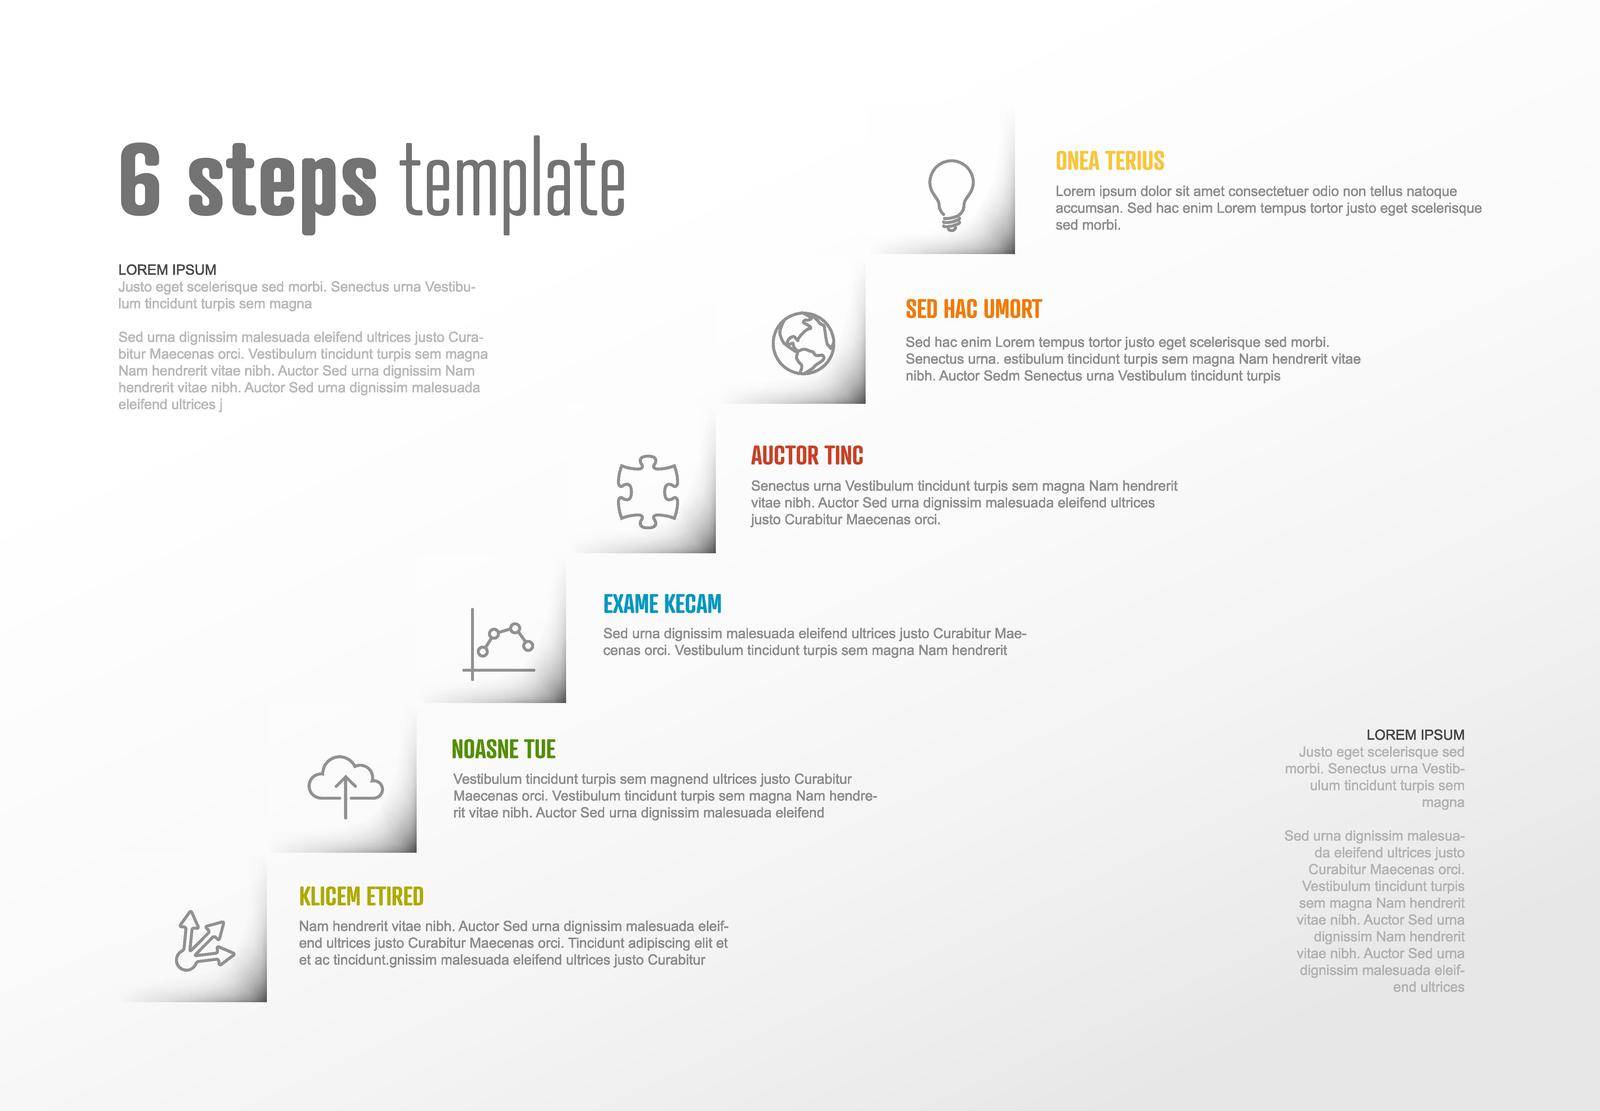 Infogrpahic stairs steps diagram template by orson